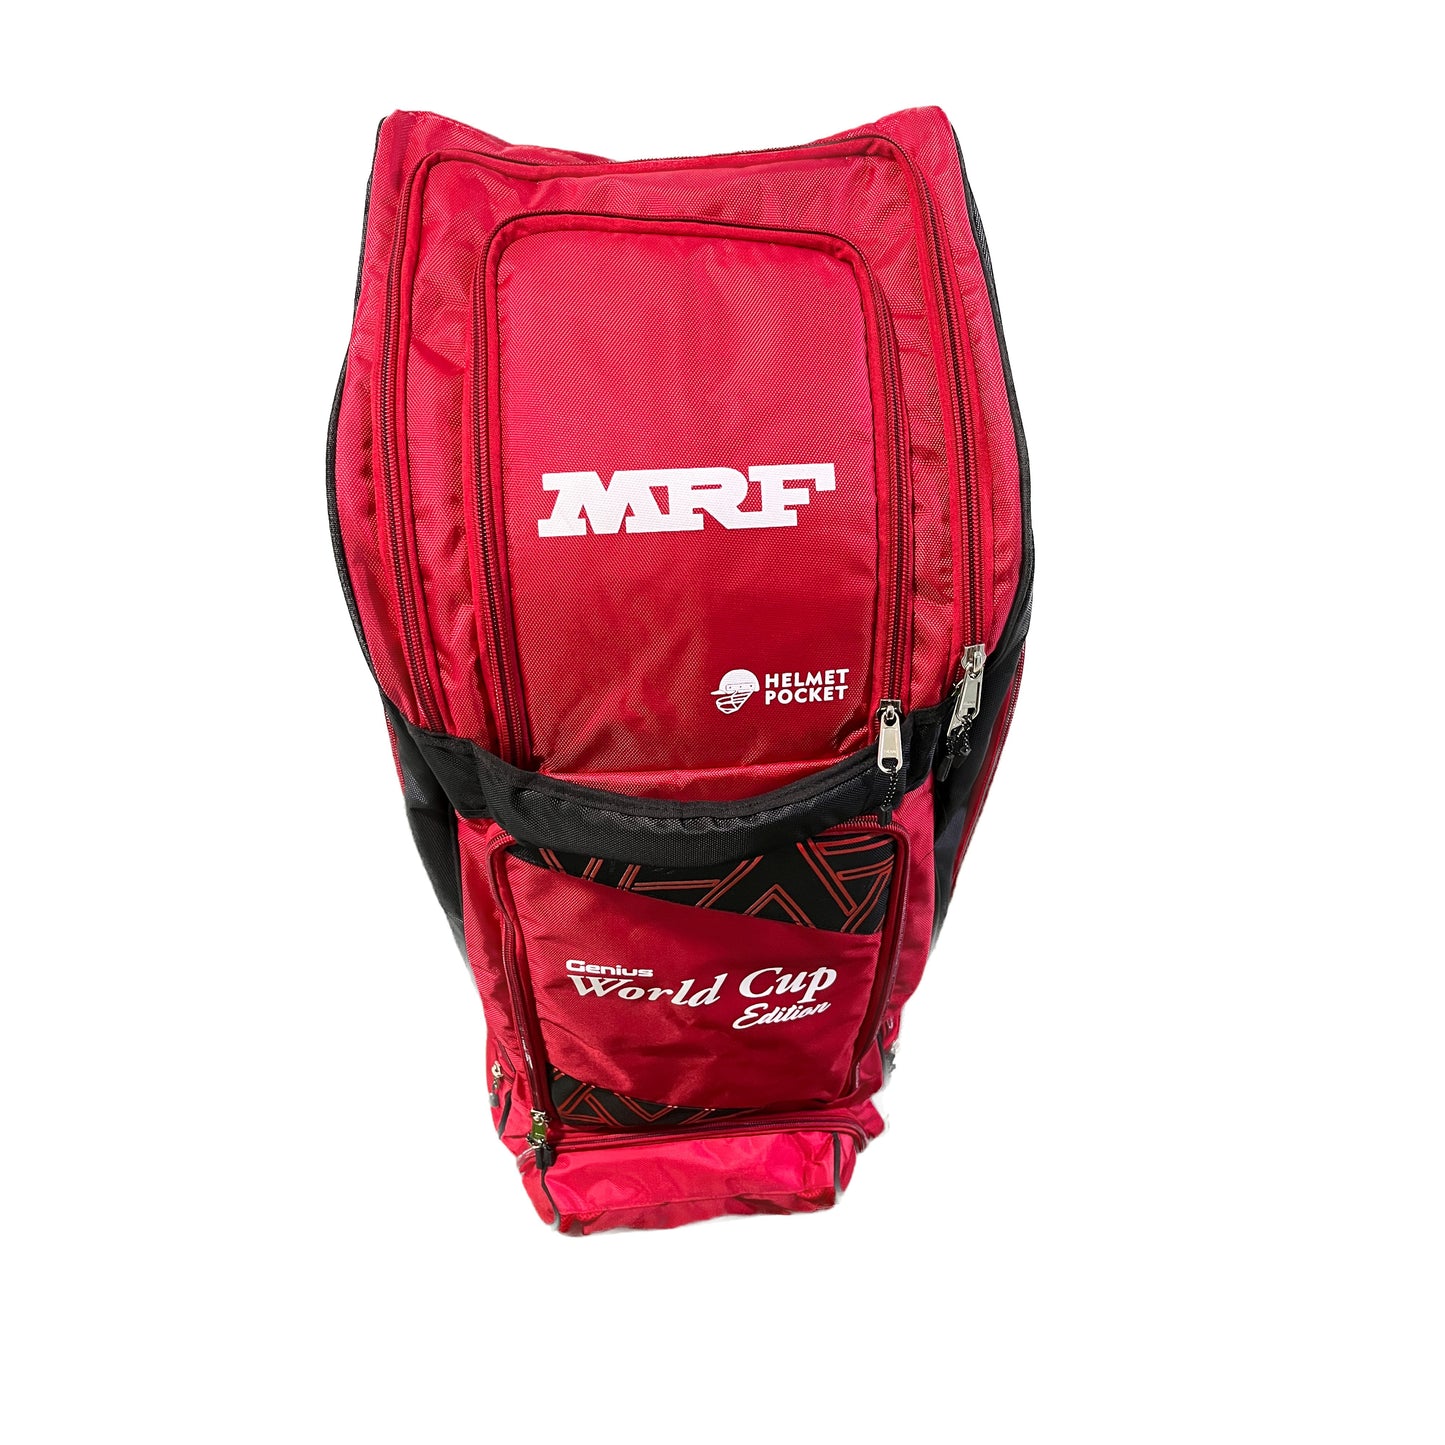 MRF World Cup Edition Cricket Kit Bag with wheels